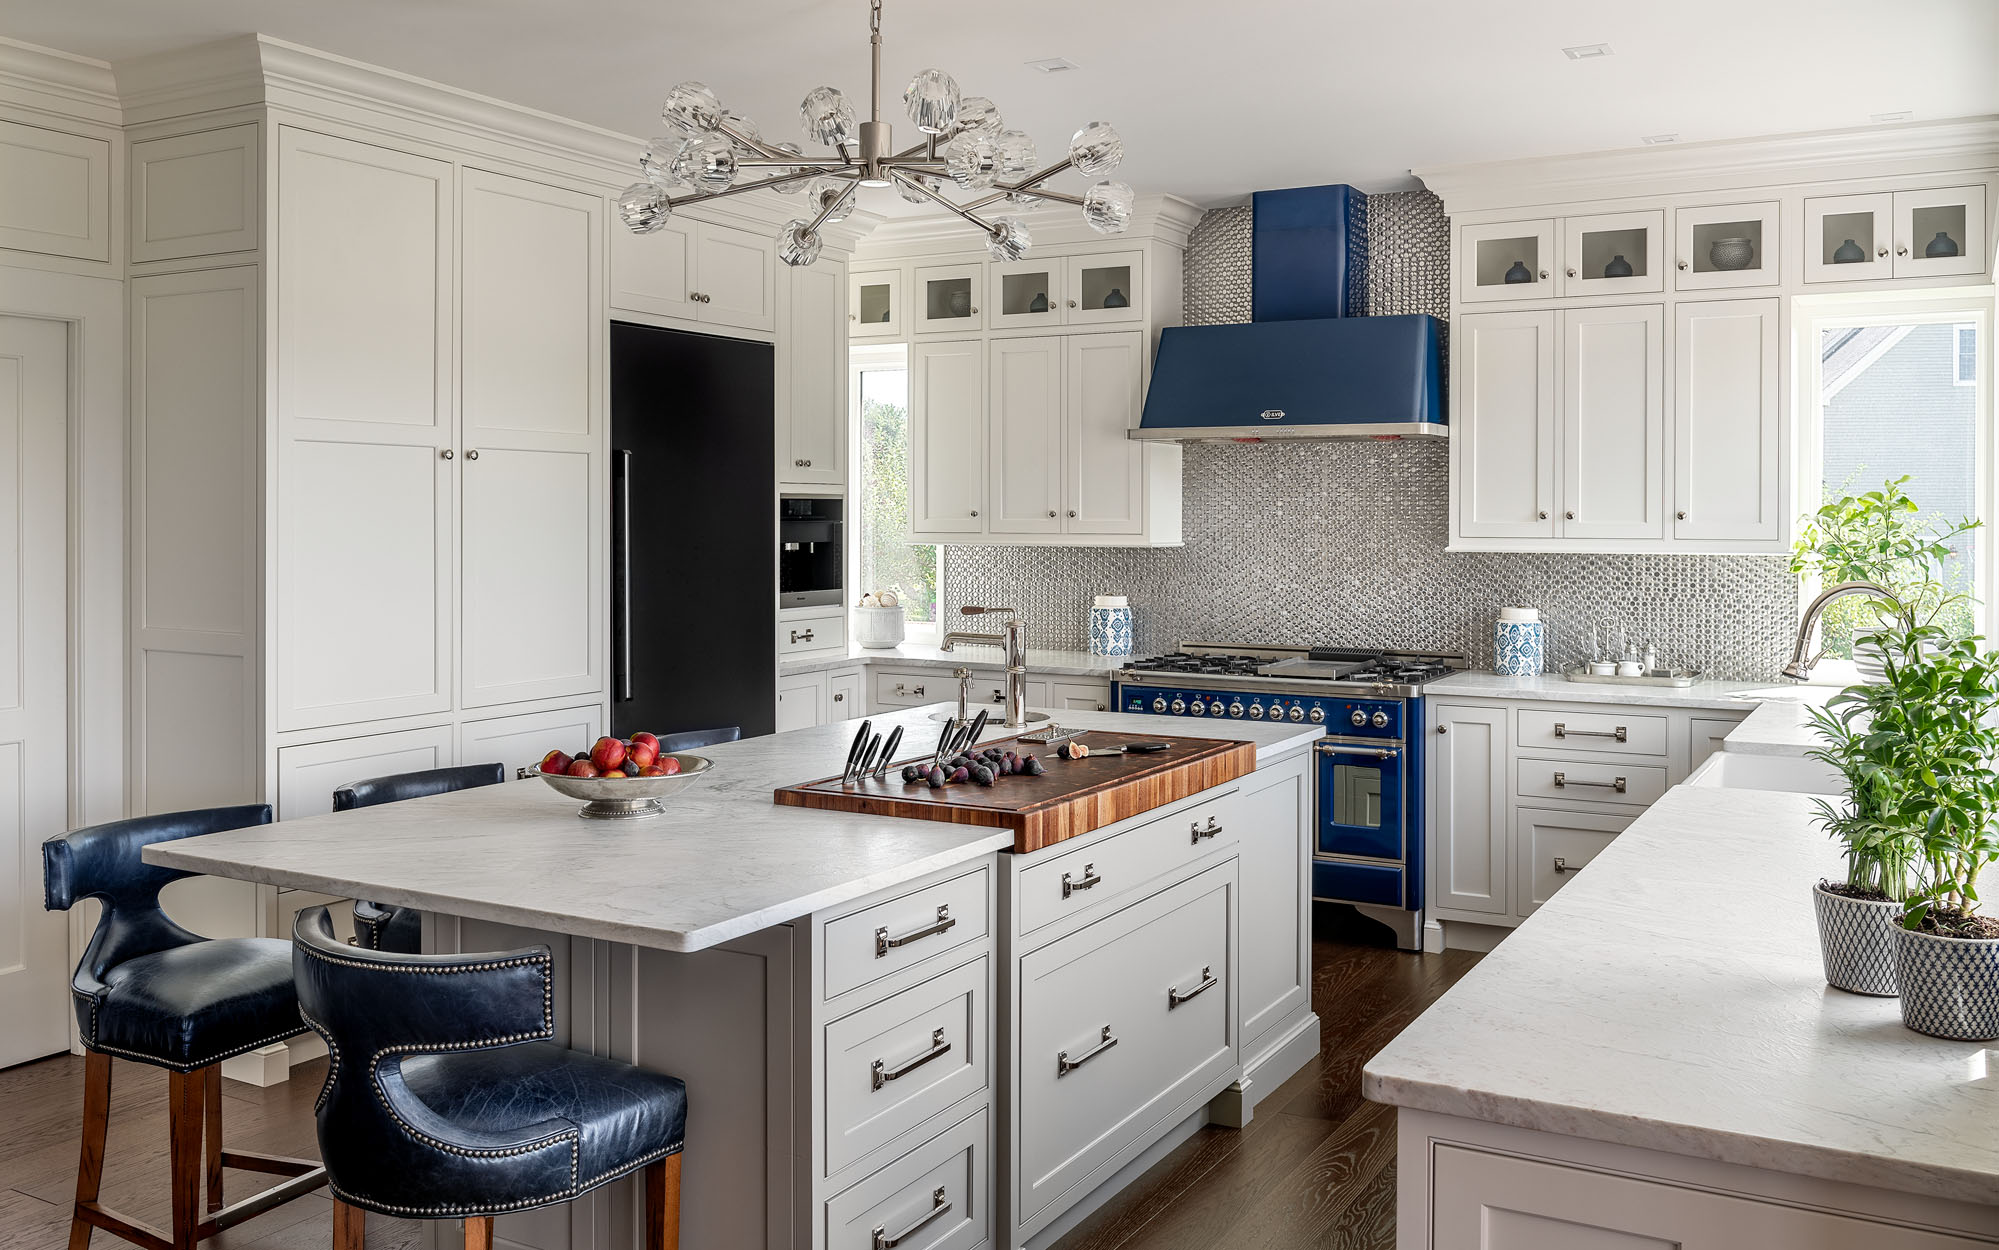 2020 Kitchen Island Trends Using Two Different Colors for Cabinetry